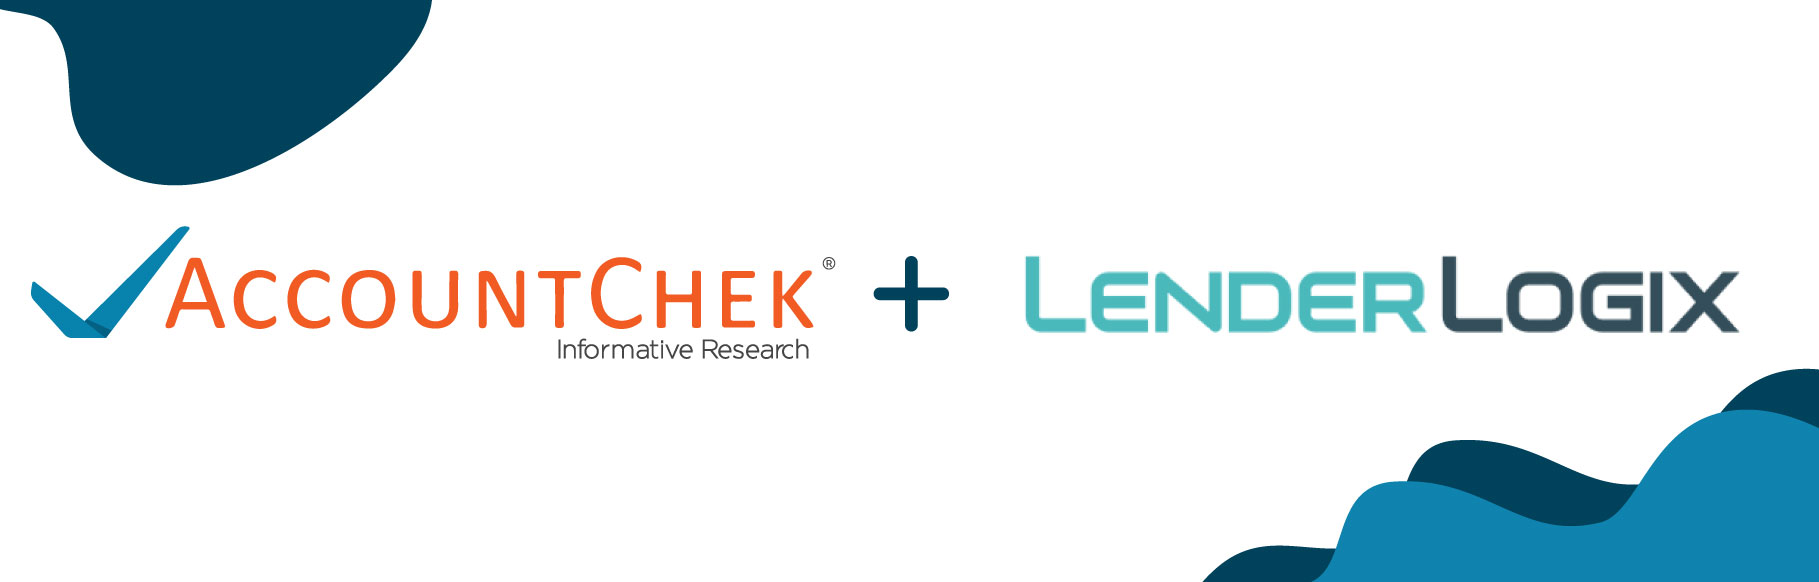 LenderLogix Announces POS Integration with Informative Research’s AccountChek to Enhance the Mortgage Borrower Experience